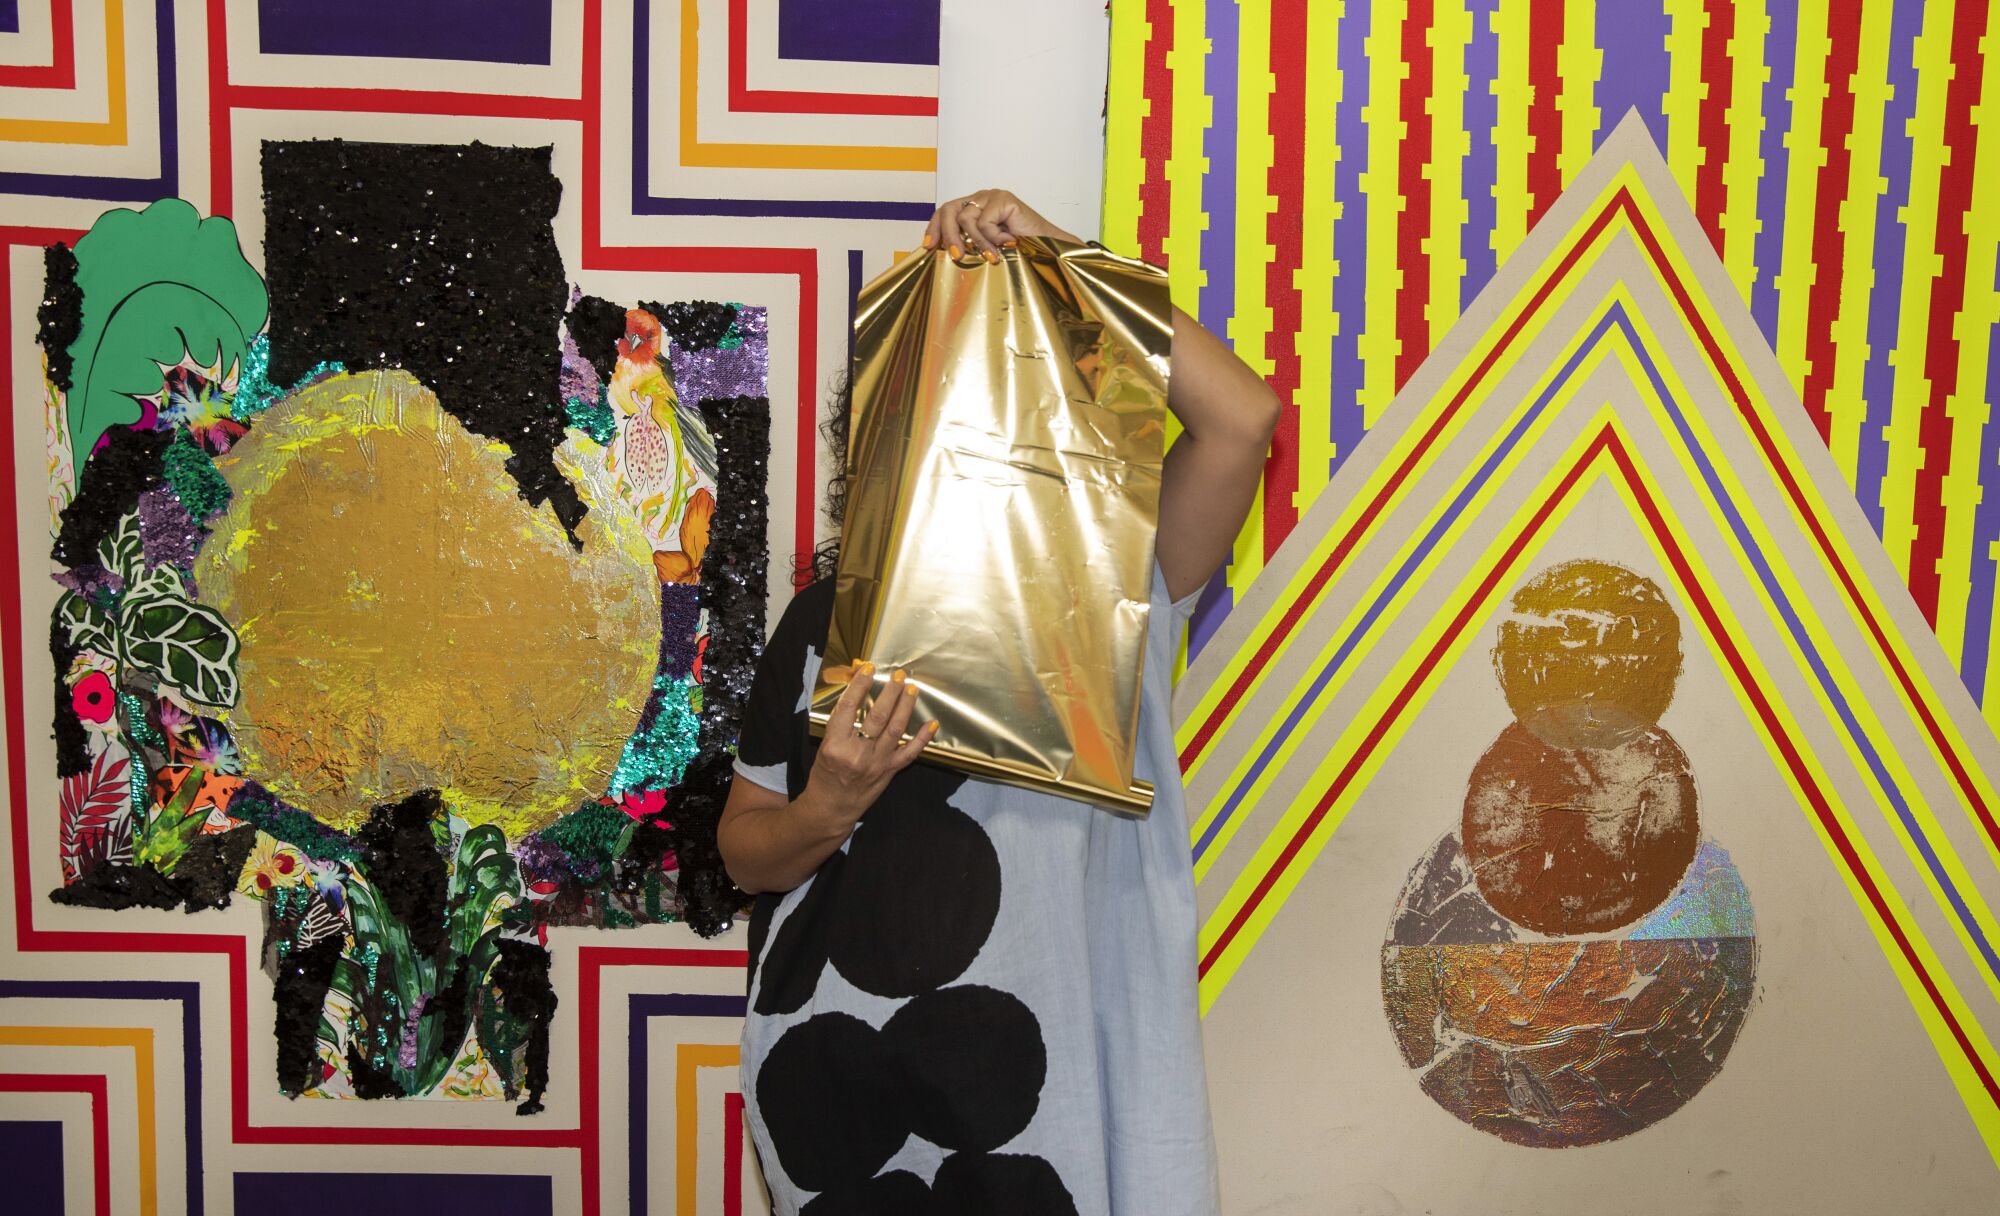 Carolyn Castaño, in a gray and black dress, holds up a gold sheet in front of her face as she stands before paintings